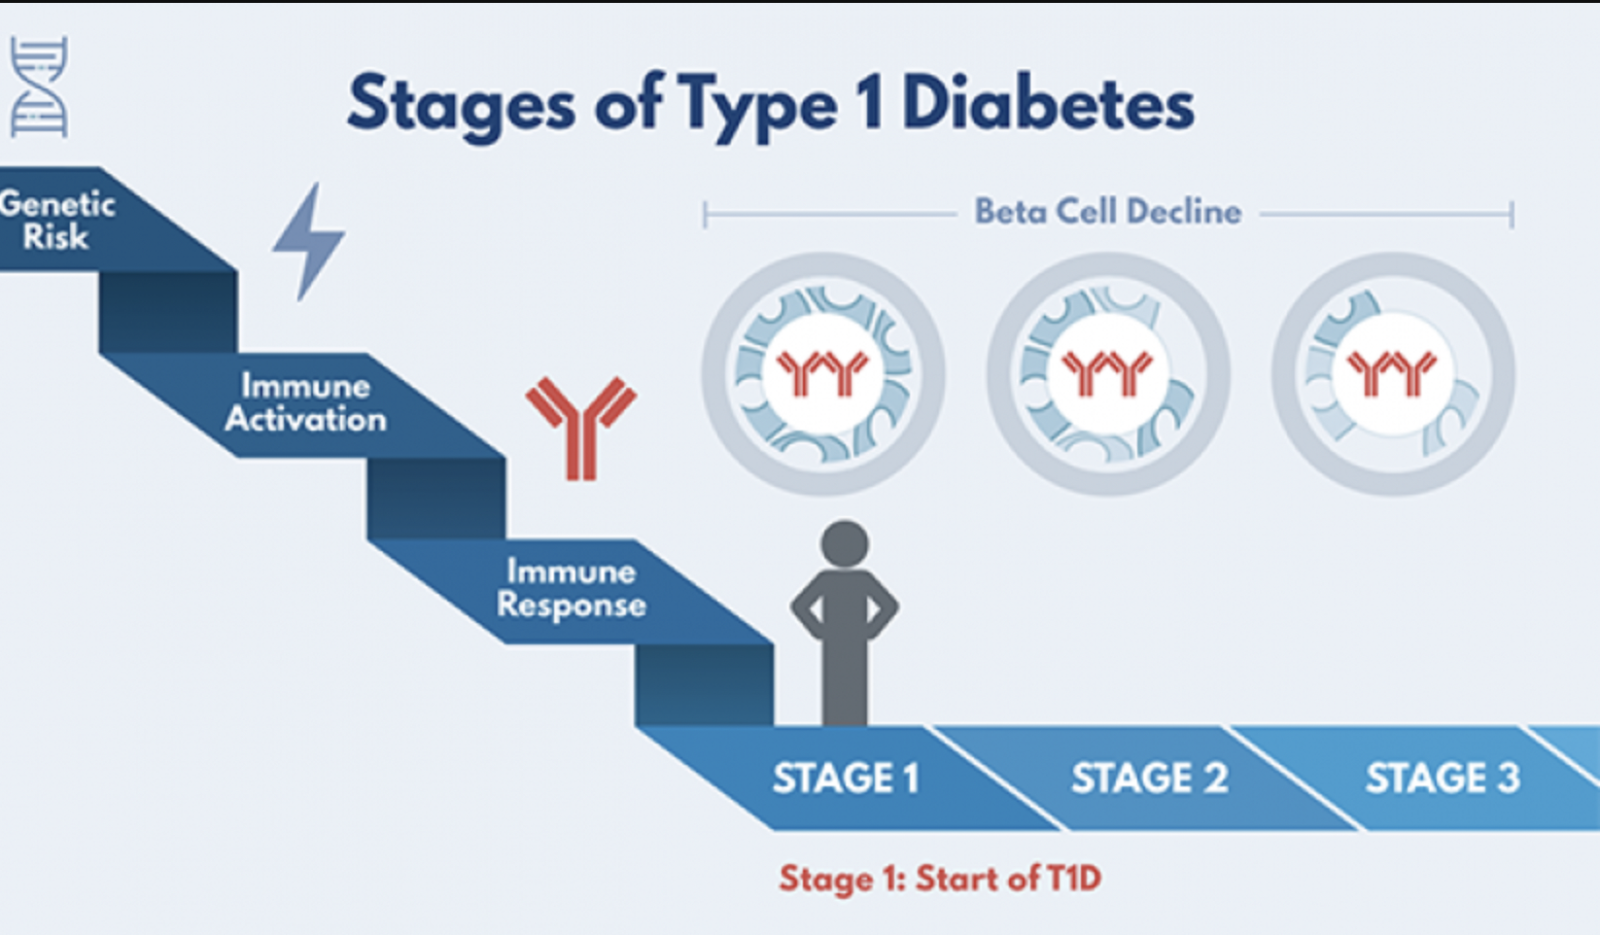 The stages of type 1 diabetes